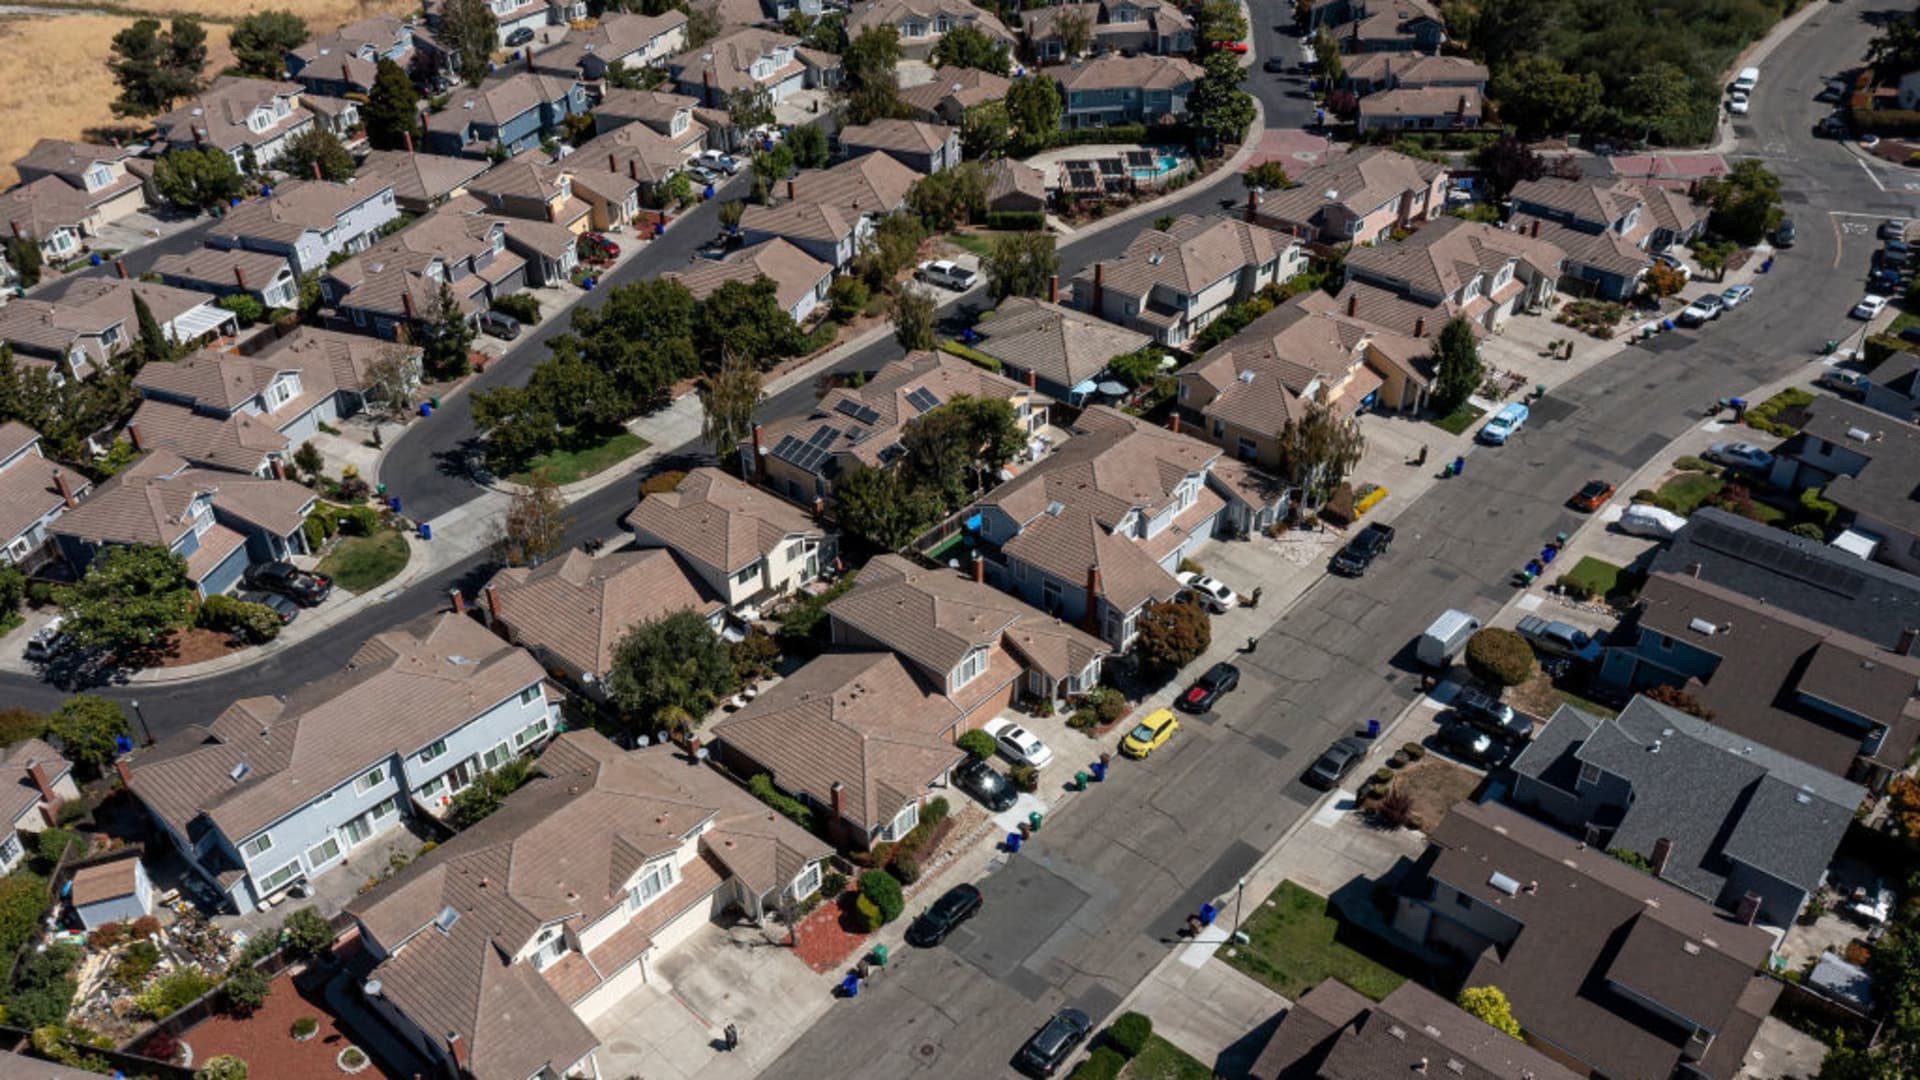 Mortgage refinance demand jumps 14% as rates fall to lowest point since August